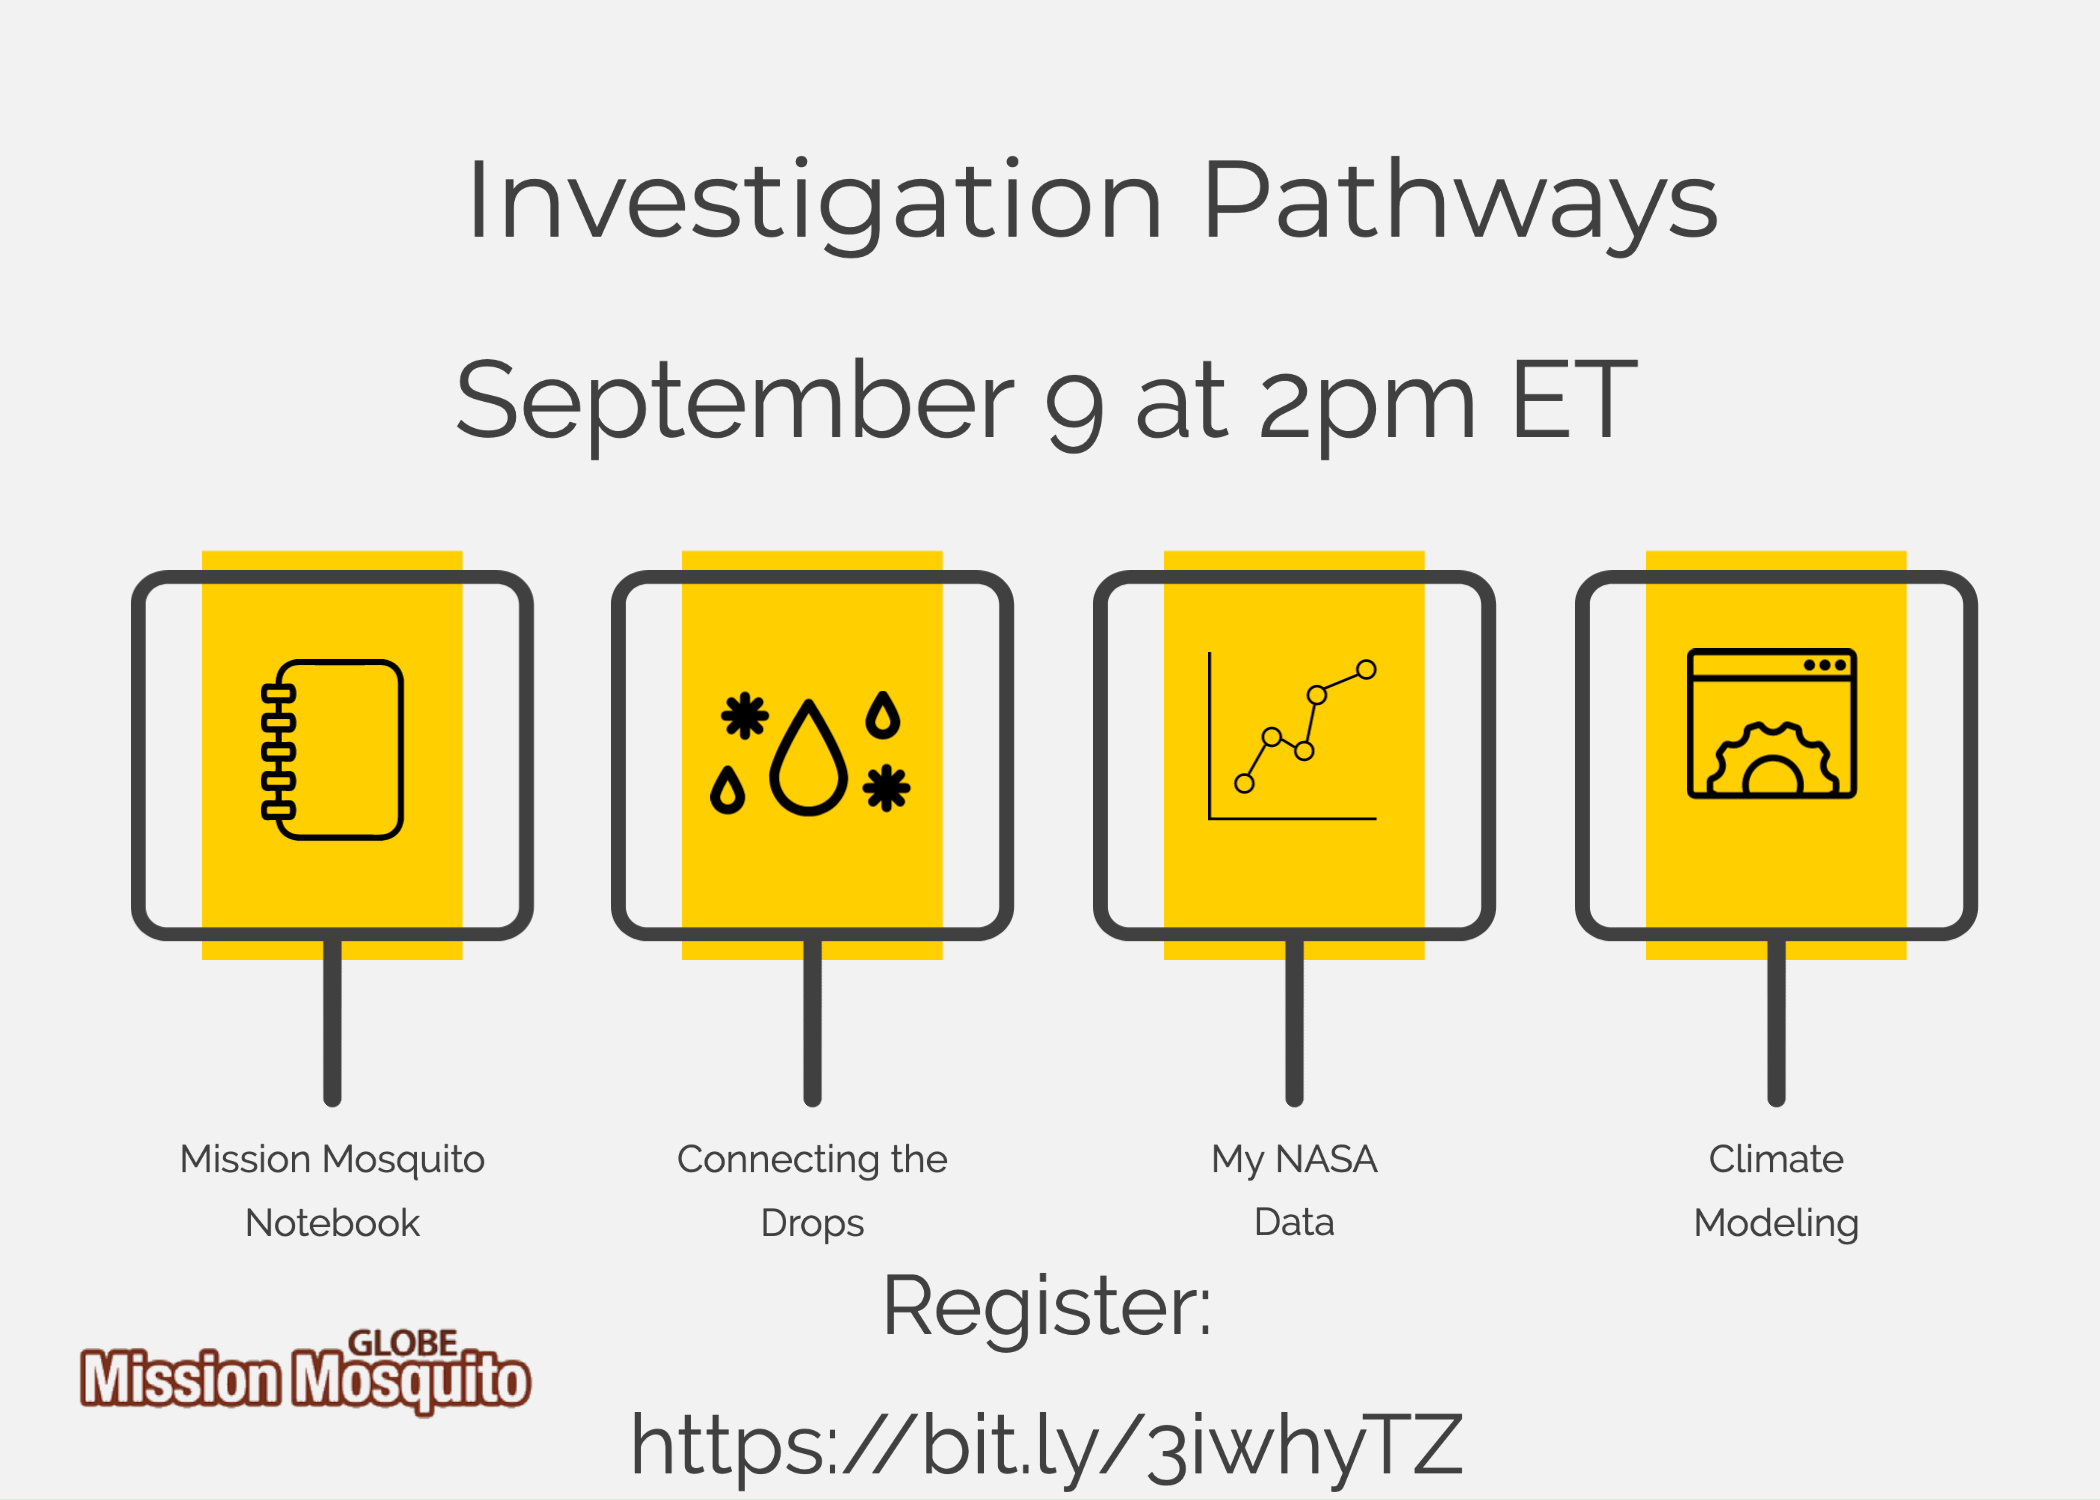 GLOBE Mission Mosquito 09 September webinar shareable showing four paths leading to different options for the webinar